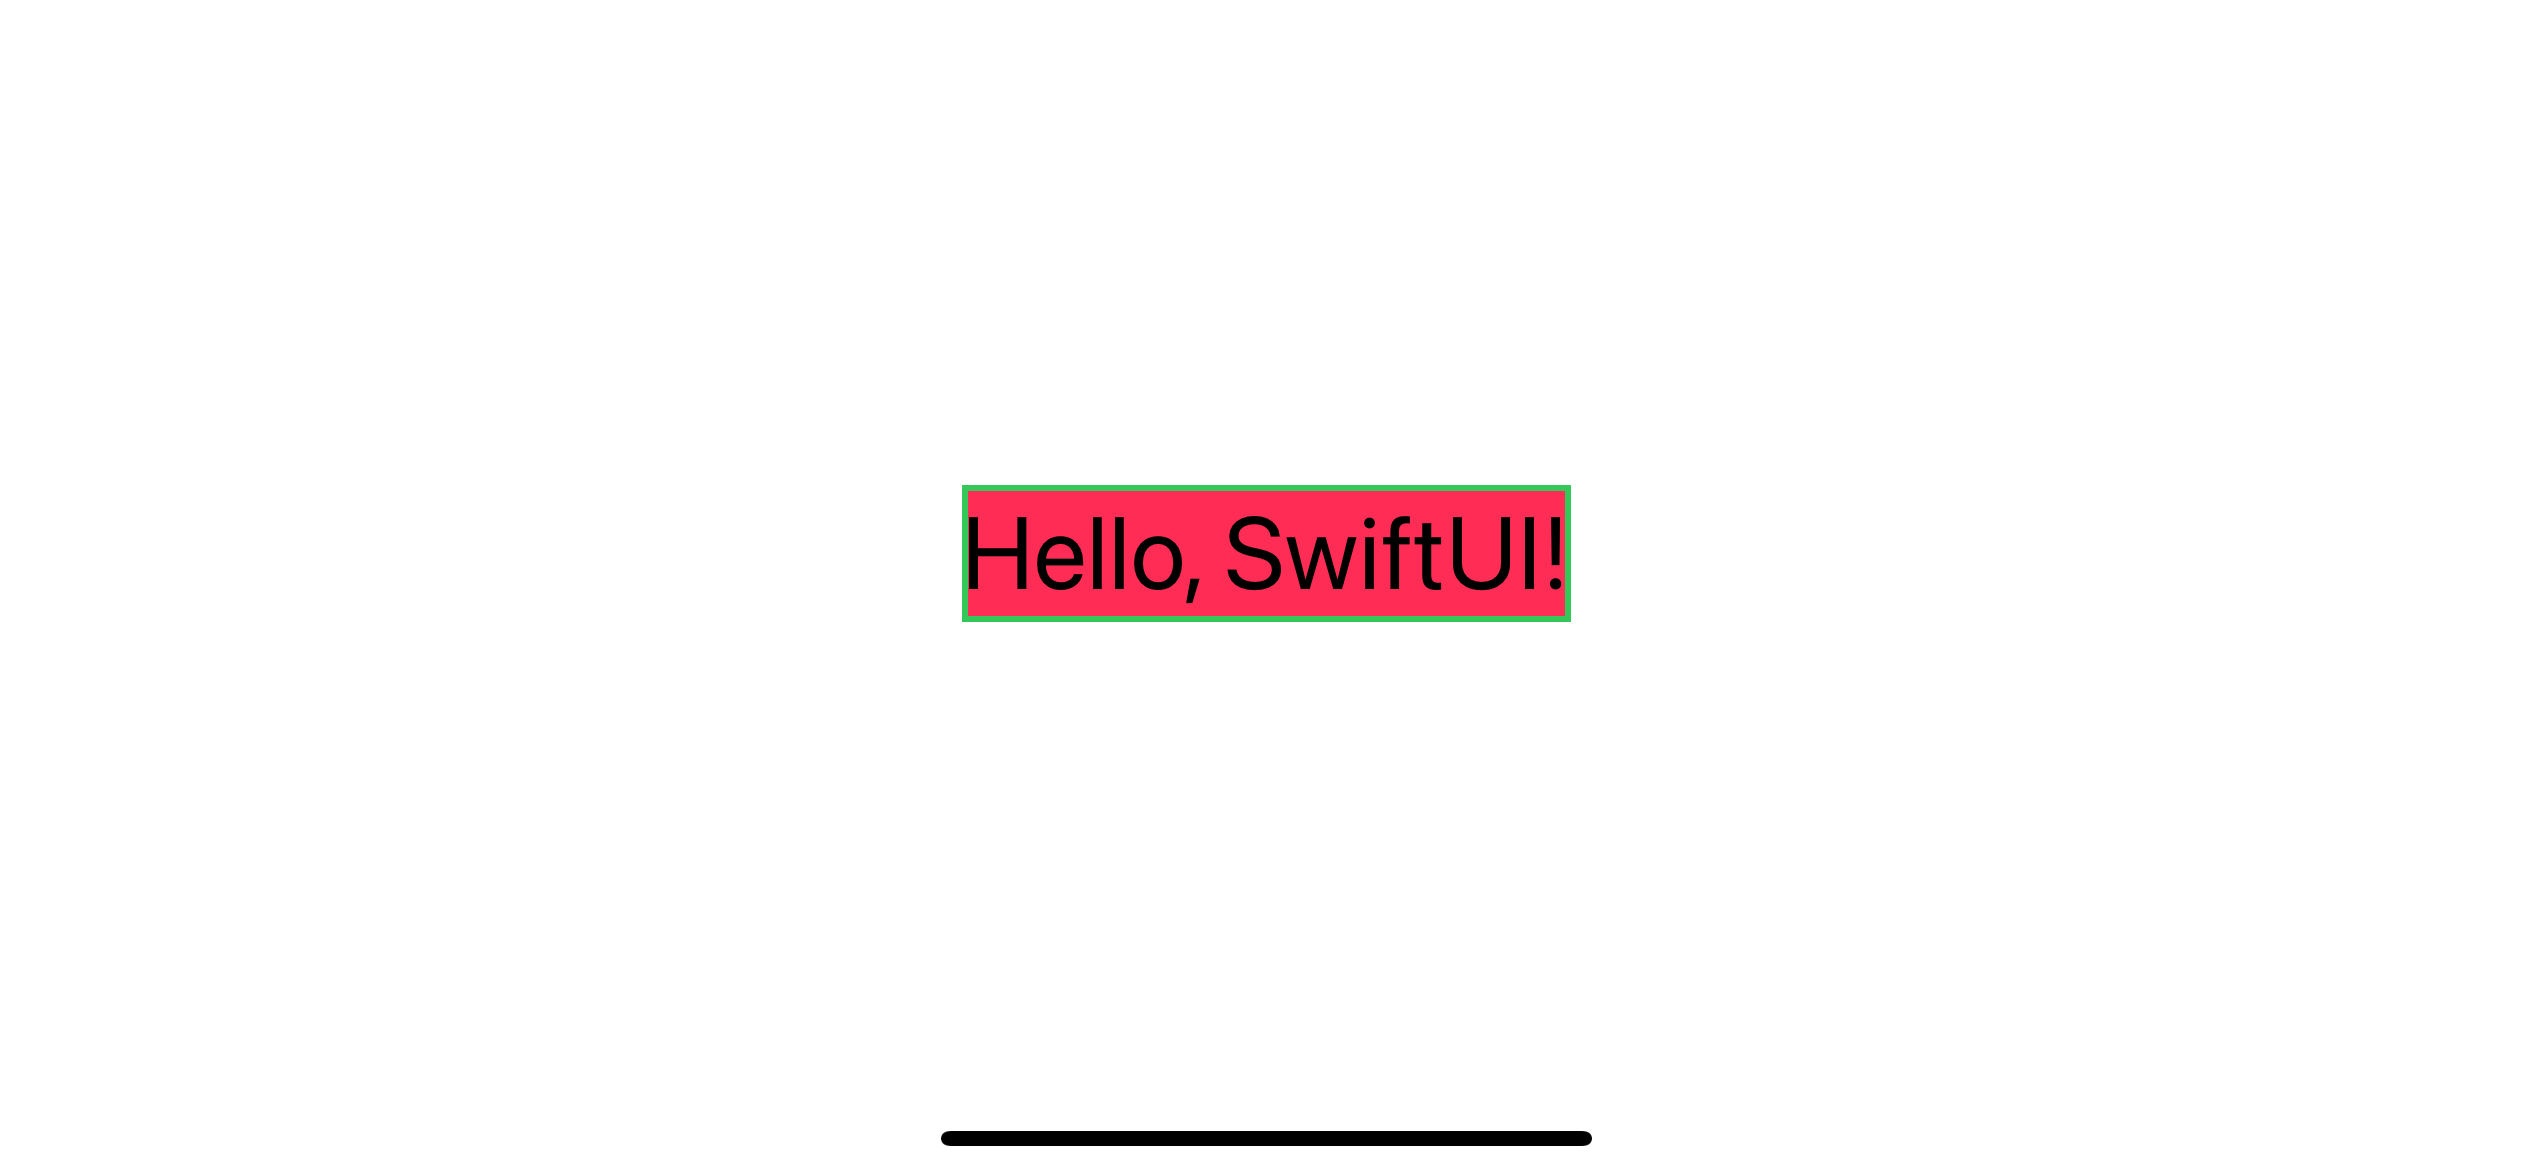 How to add background to your view in SwiftUI | Sarunw